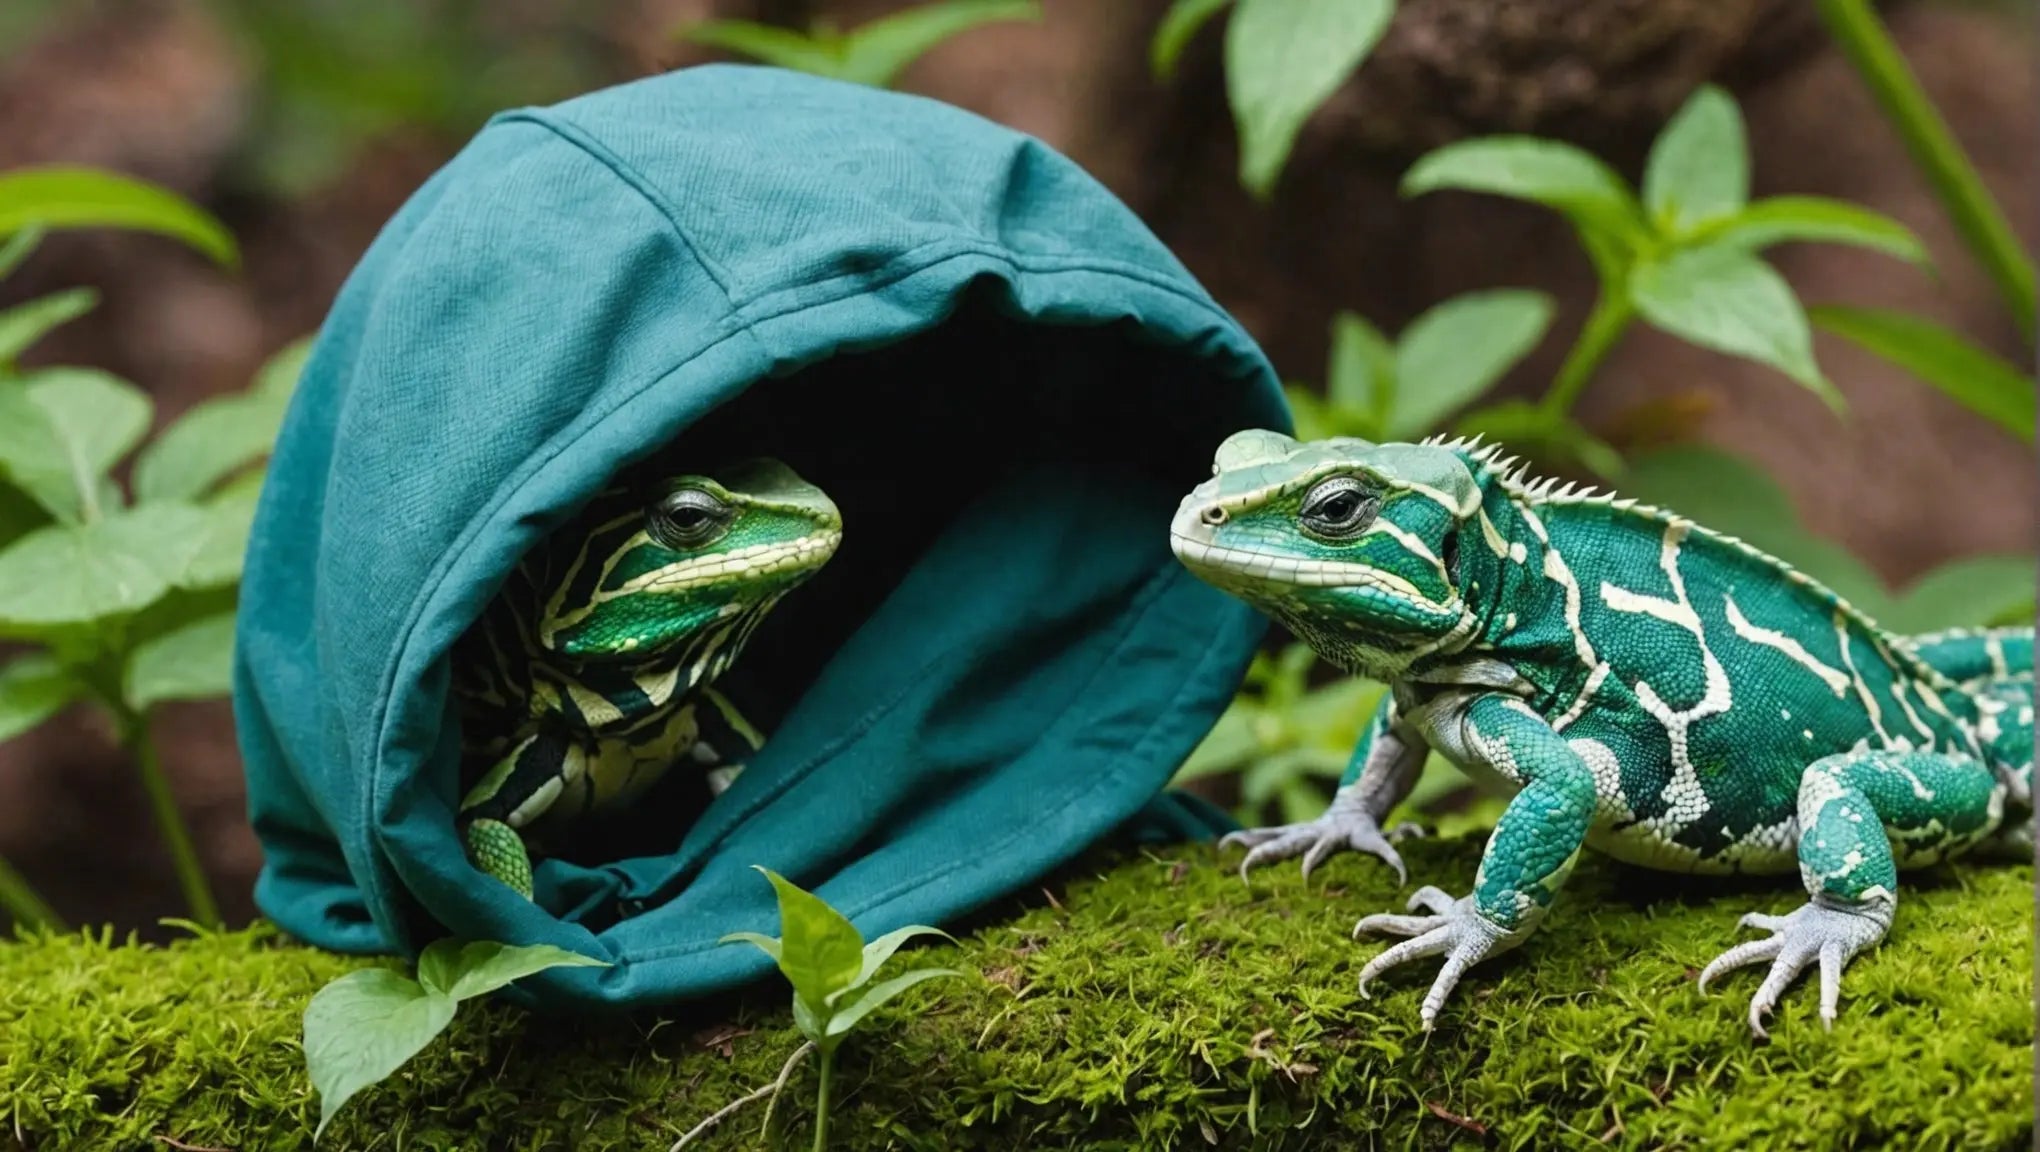 Enhance Your Reptile's Habitat with High-Quality Hoods for Reptiles